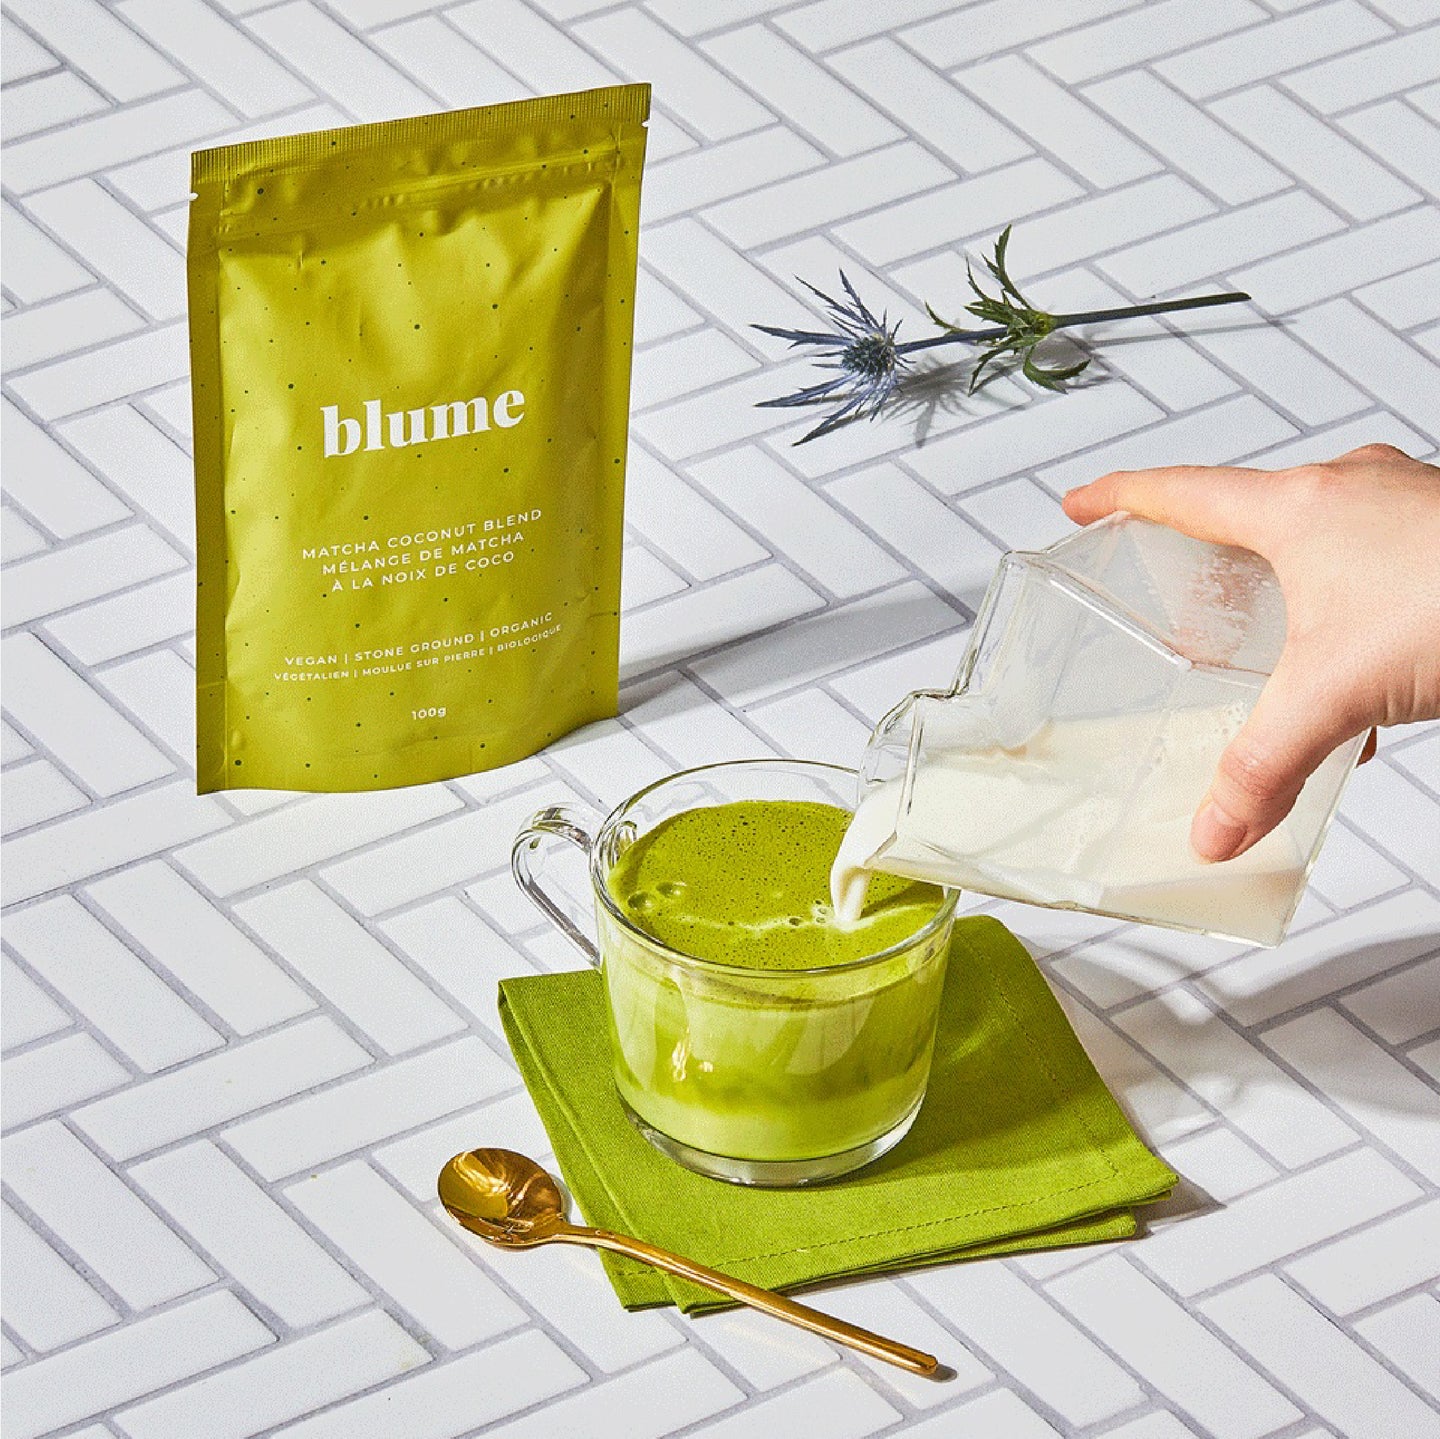 Milk pouring into a glass mug of matcha latte made with Blume Matcha Coconut Blend on a tile background